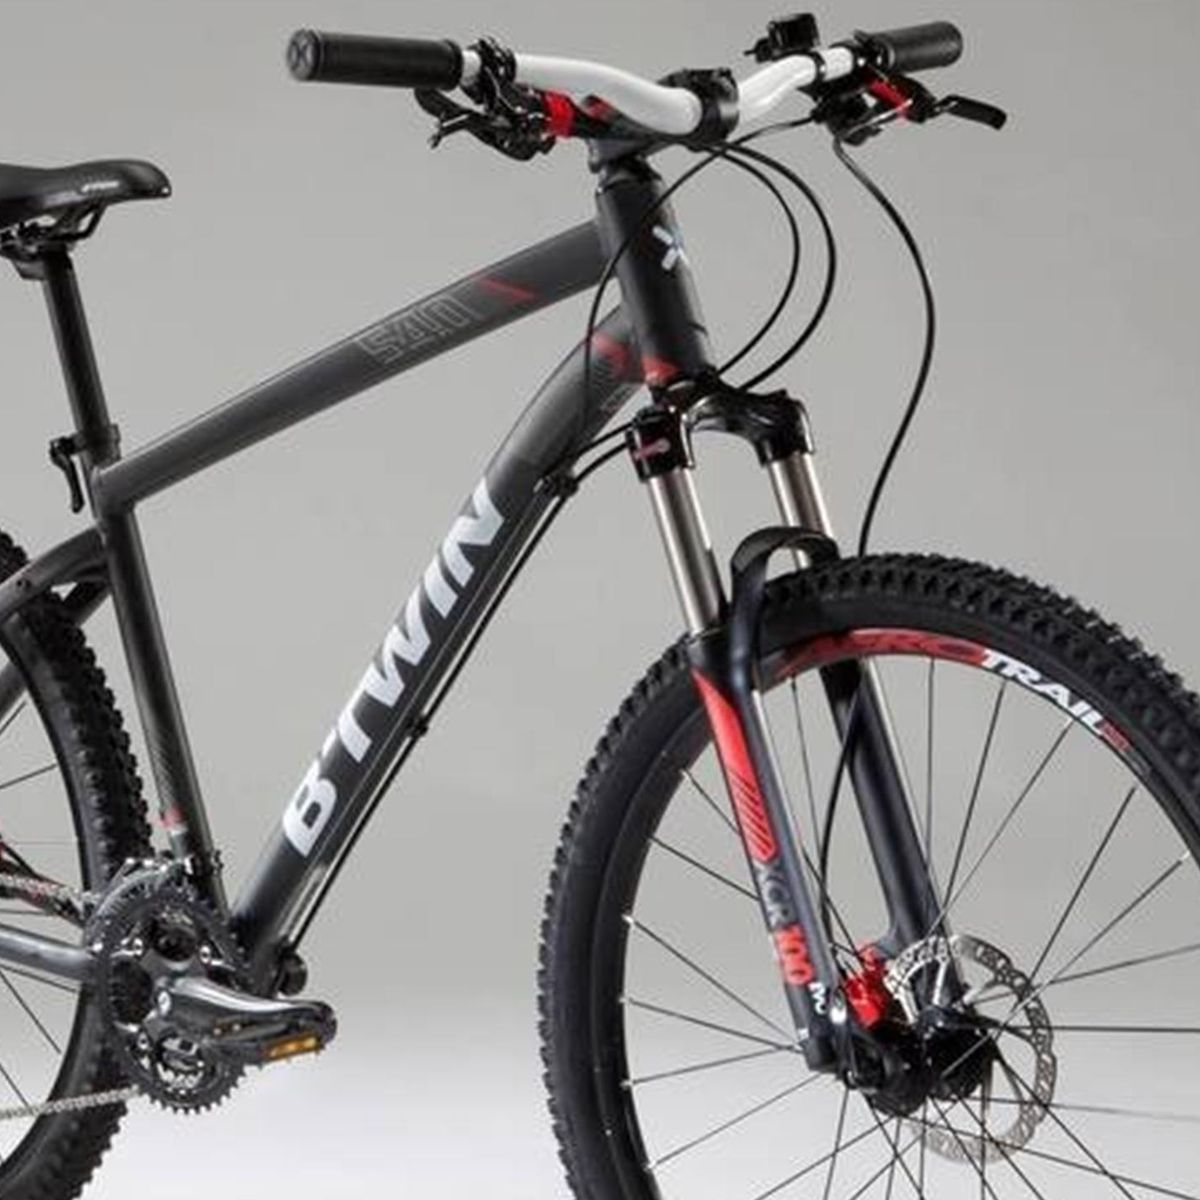 btwin rockrider 540 review